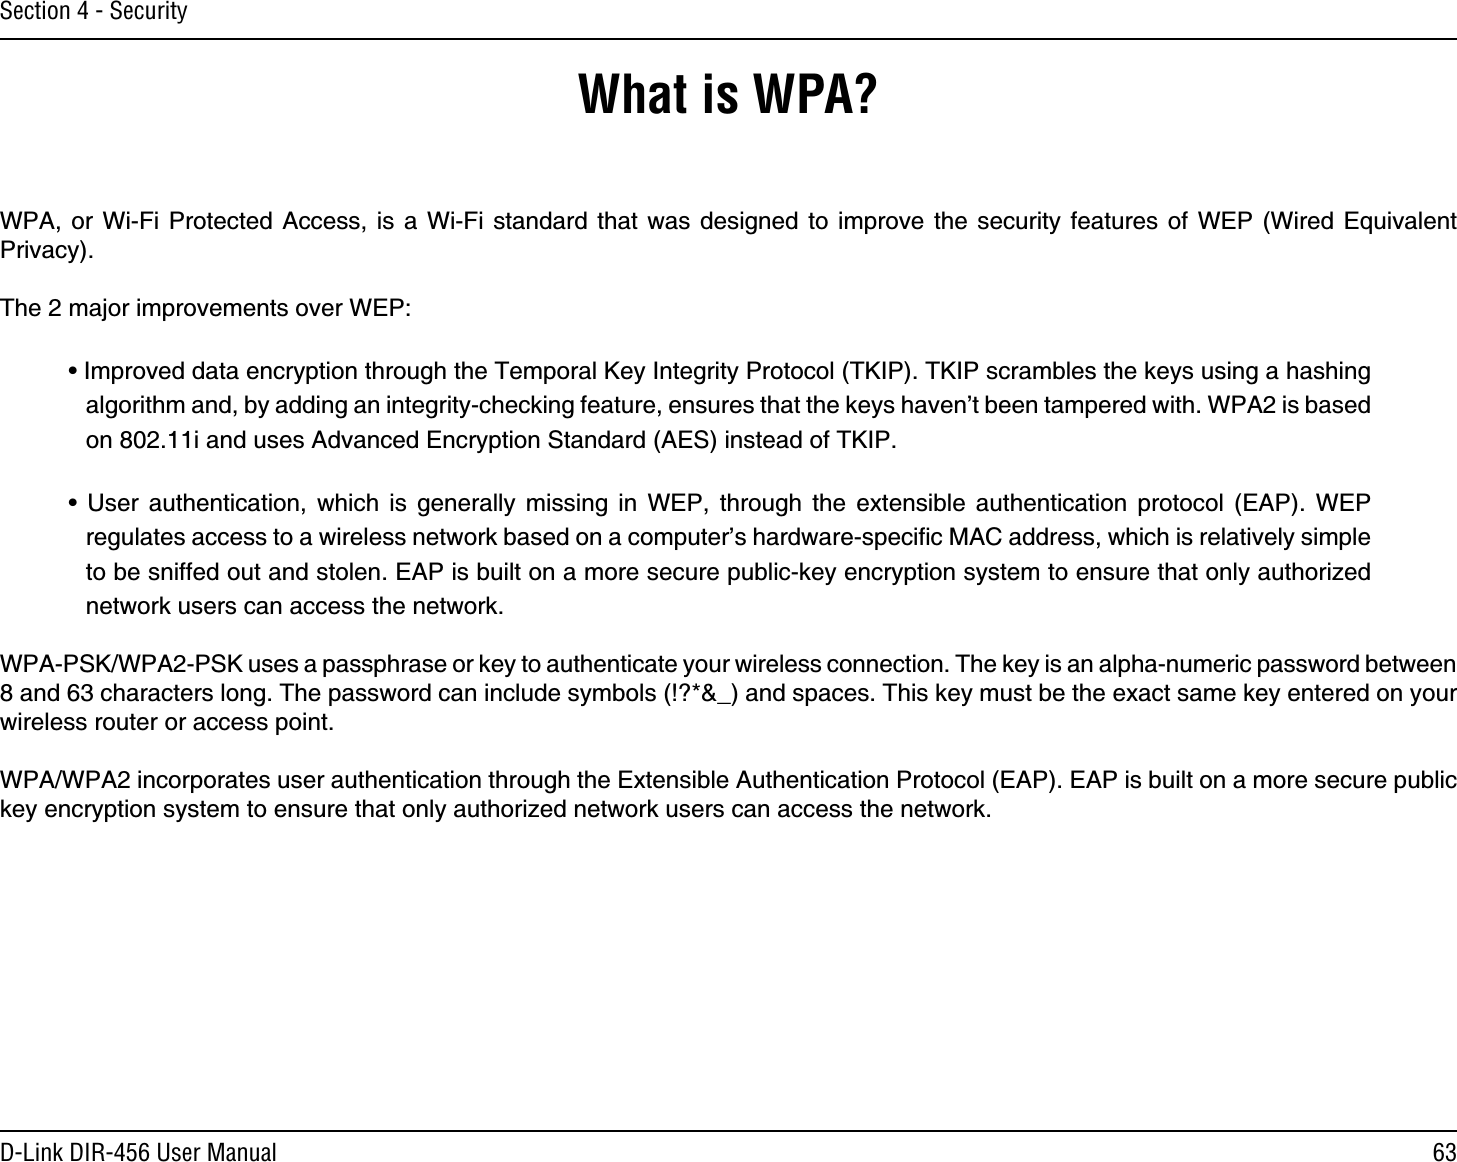 63D-Link DIR-456 User ManualSection 4 - SecurityWhat is WPA?WPA, or Wi-Fi Protected Access, is a Wi-Fi standard that was designed to improve the security features of WEP (Wired Equivalent Privacy).  The 2 major improvements over WEP: • Improved data encryption through the Temporal Key Integrity Protocol (TKIP). TKIP scrambles the keys using a hashing algorithm and, by adding an integrity-checking feature, ensures that the keys haven’t been tampered with. WPA2 is based on 802.11i and uses Advanced Encryption Standard (AES) instead of TKIP.• User authentication, which is generally missing in WEP, through the extensible authentication protocol (EAP). WEP regulates access to a wireless network based on a computer’s hardware-speciﬁc MAC address, which is relatively simple to be sniffed out and stolen. EAP is built on a more secure public-key encryption system to ensure that only authorized network users can access the network.WPA-PSK/WPA2-PSK uses a passphrase or key to authenticate your wireless connection. The key is an alpha-numeric password between 8 and 63 characters long. The password can include symbols (!?*&amp;_) and spaces. This key must be the exact same key entered on your wireless router or access point.WPA/WPA2 incorporates user authentication through the Extensible Authentication Protocol (EAP). EAP is built on a more secure public key encryption system to ensure that only authorized network users can access the network.